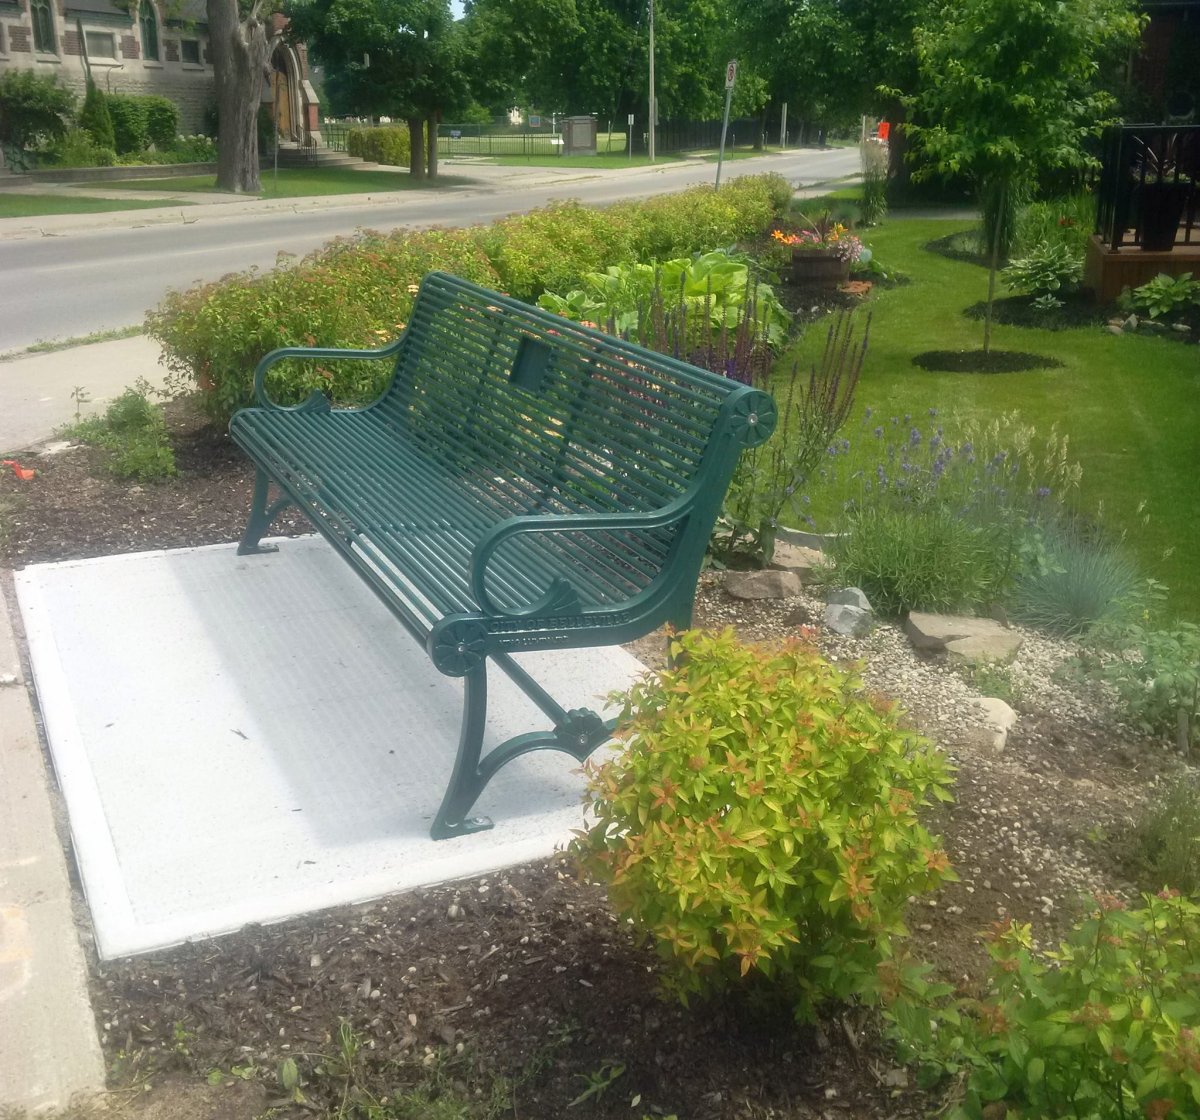 Police say this bench was stolen over the weekend.